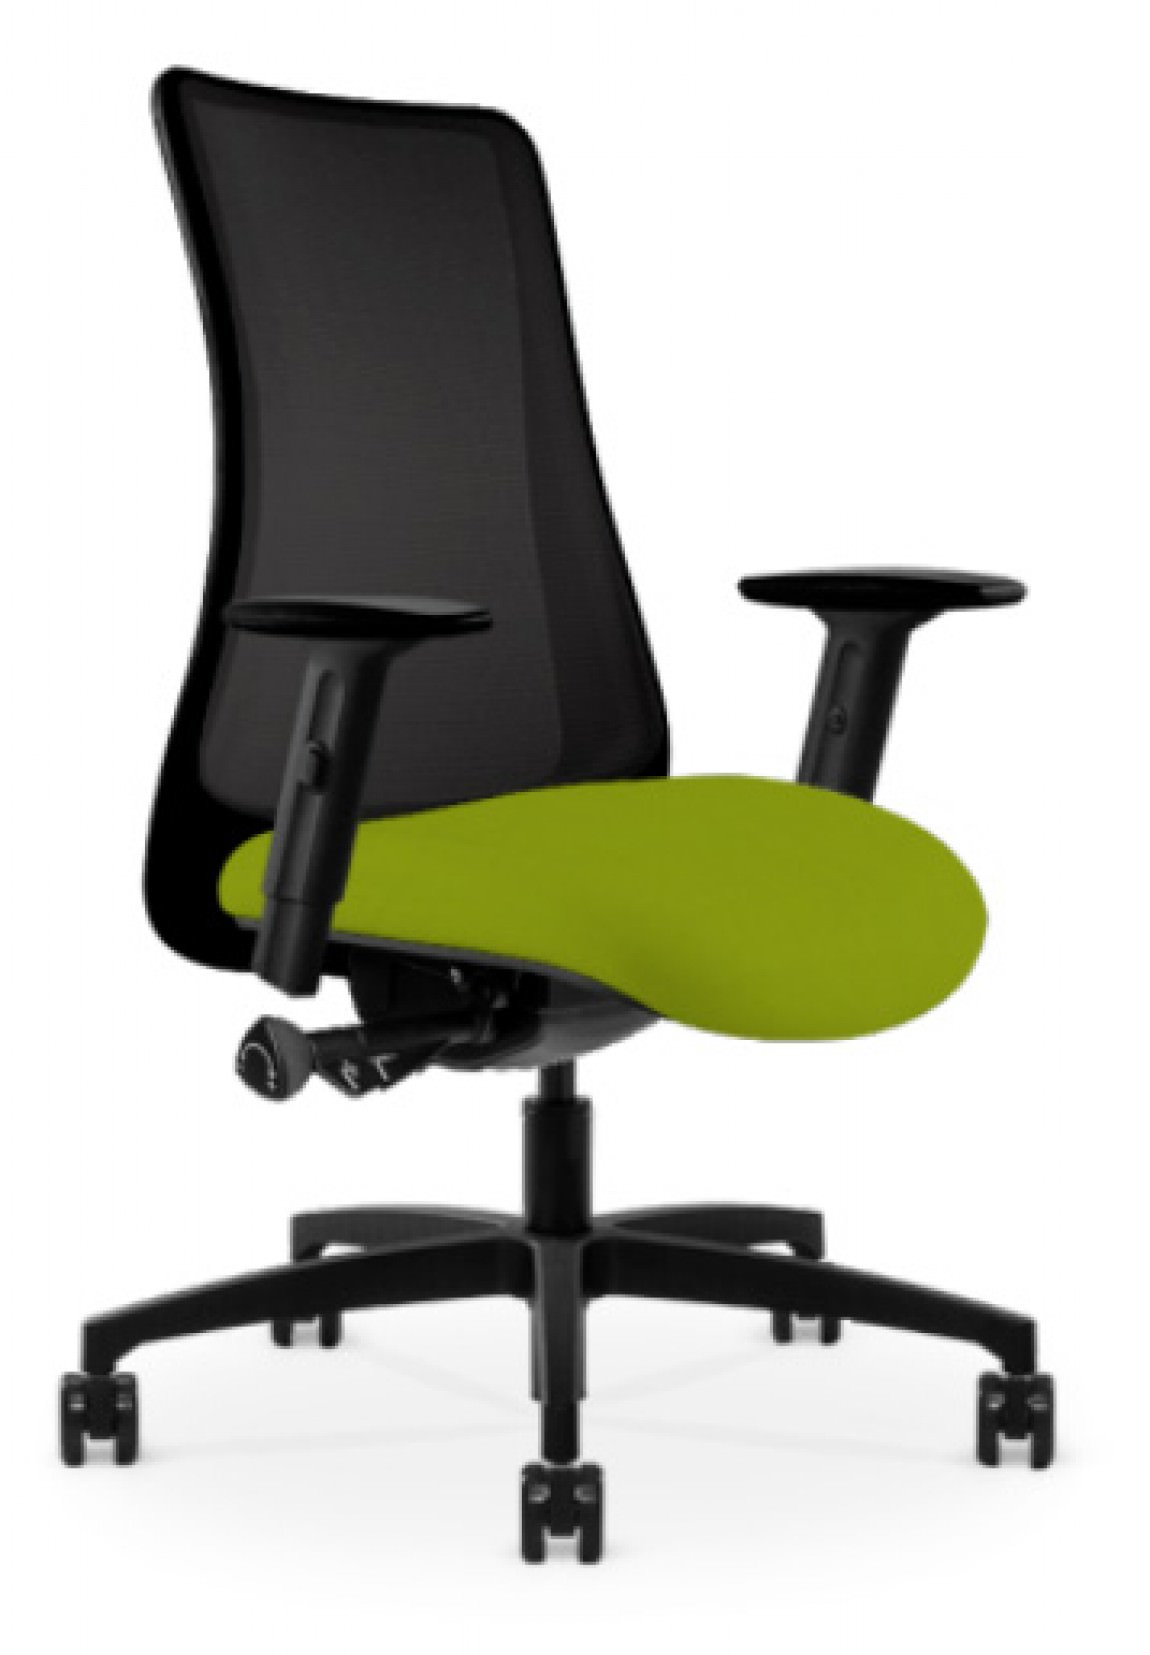 Black Copper Mesh Antimicrobial Office Chair w/ Lime Green Seat